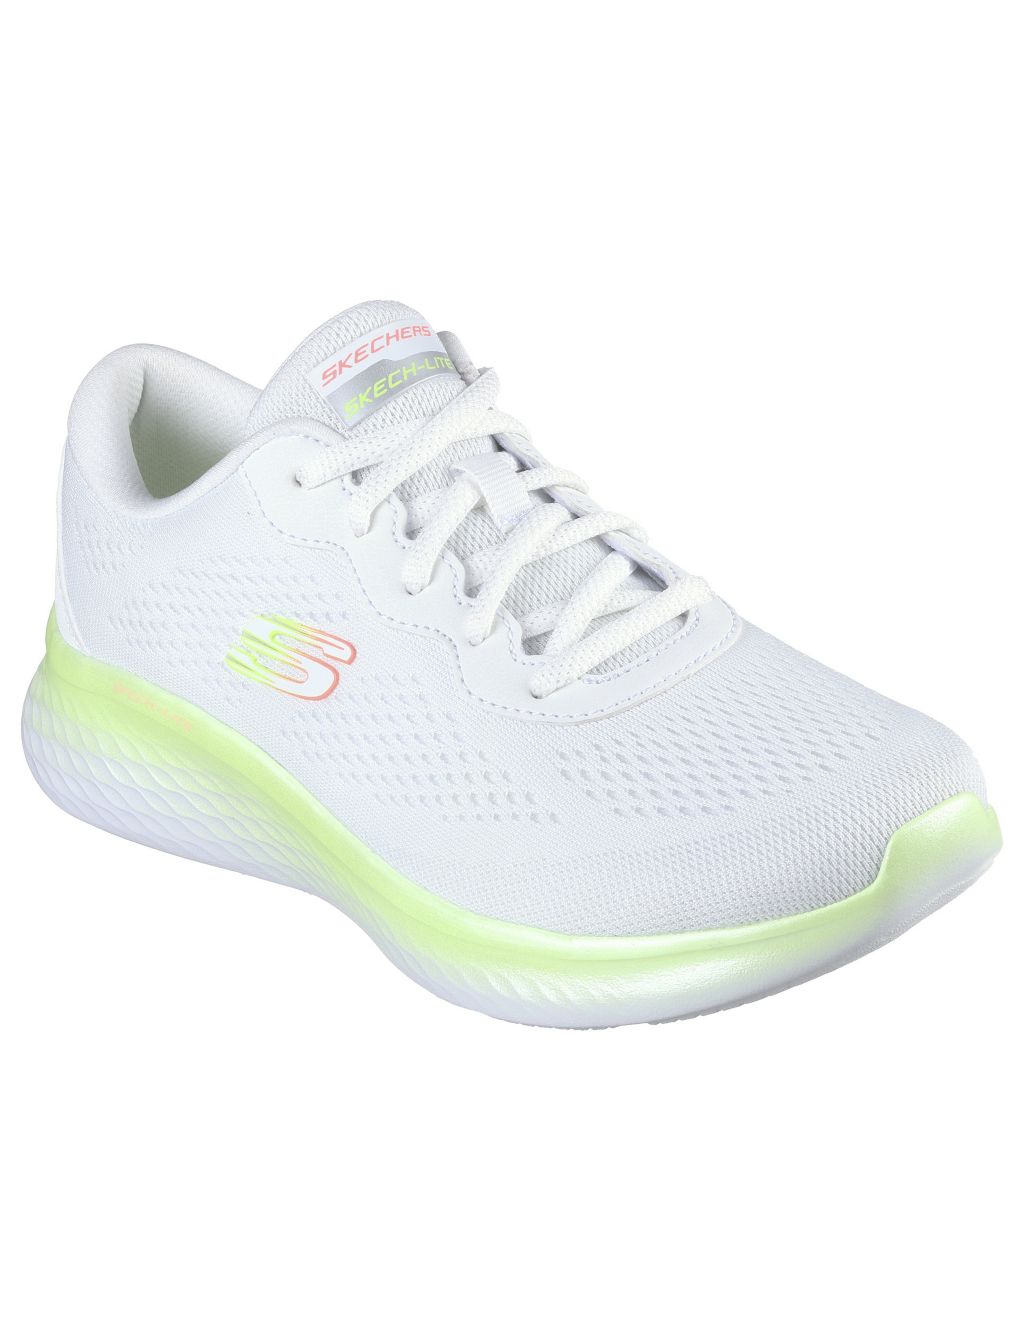 Skech-Lite Pro Stunning Steps Trainers image 2